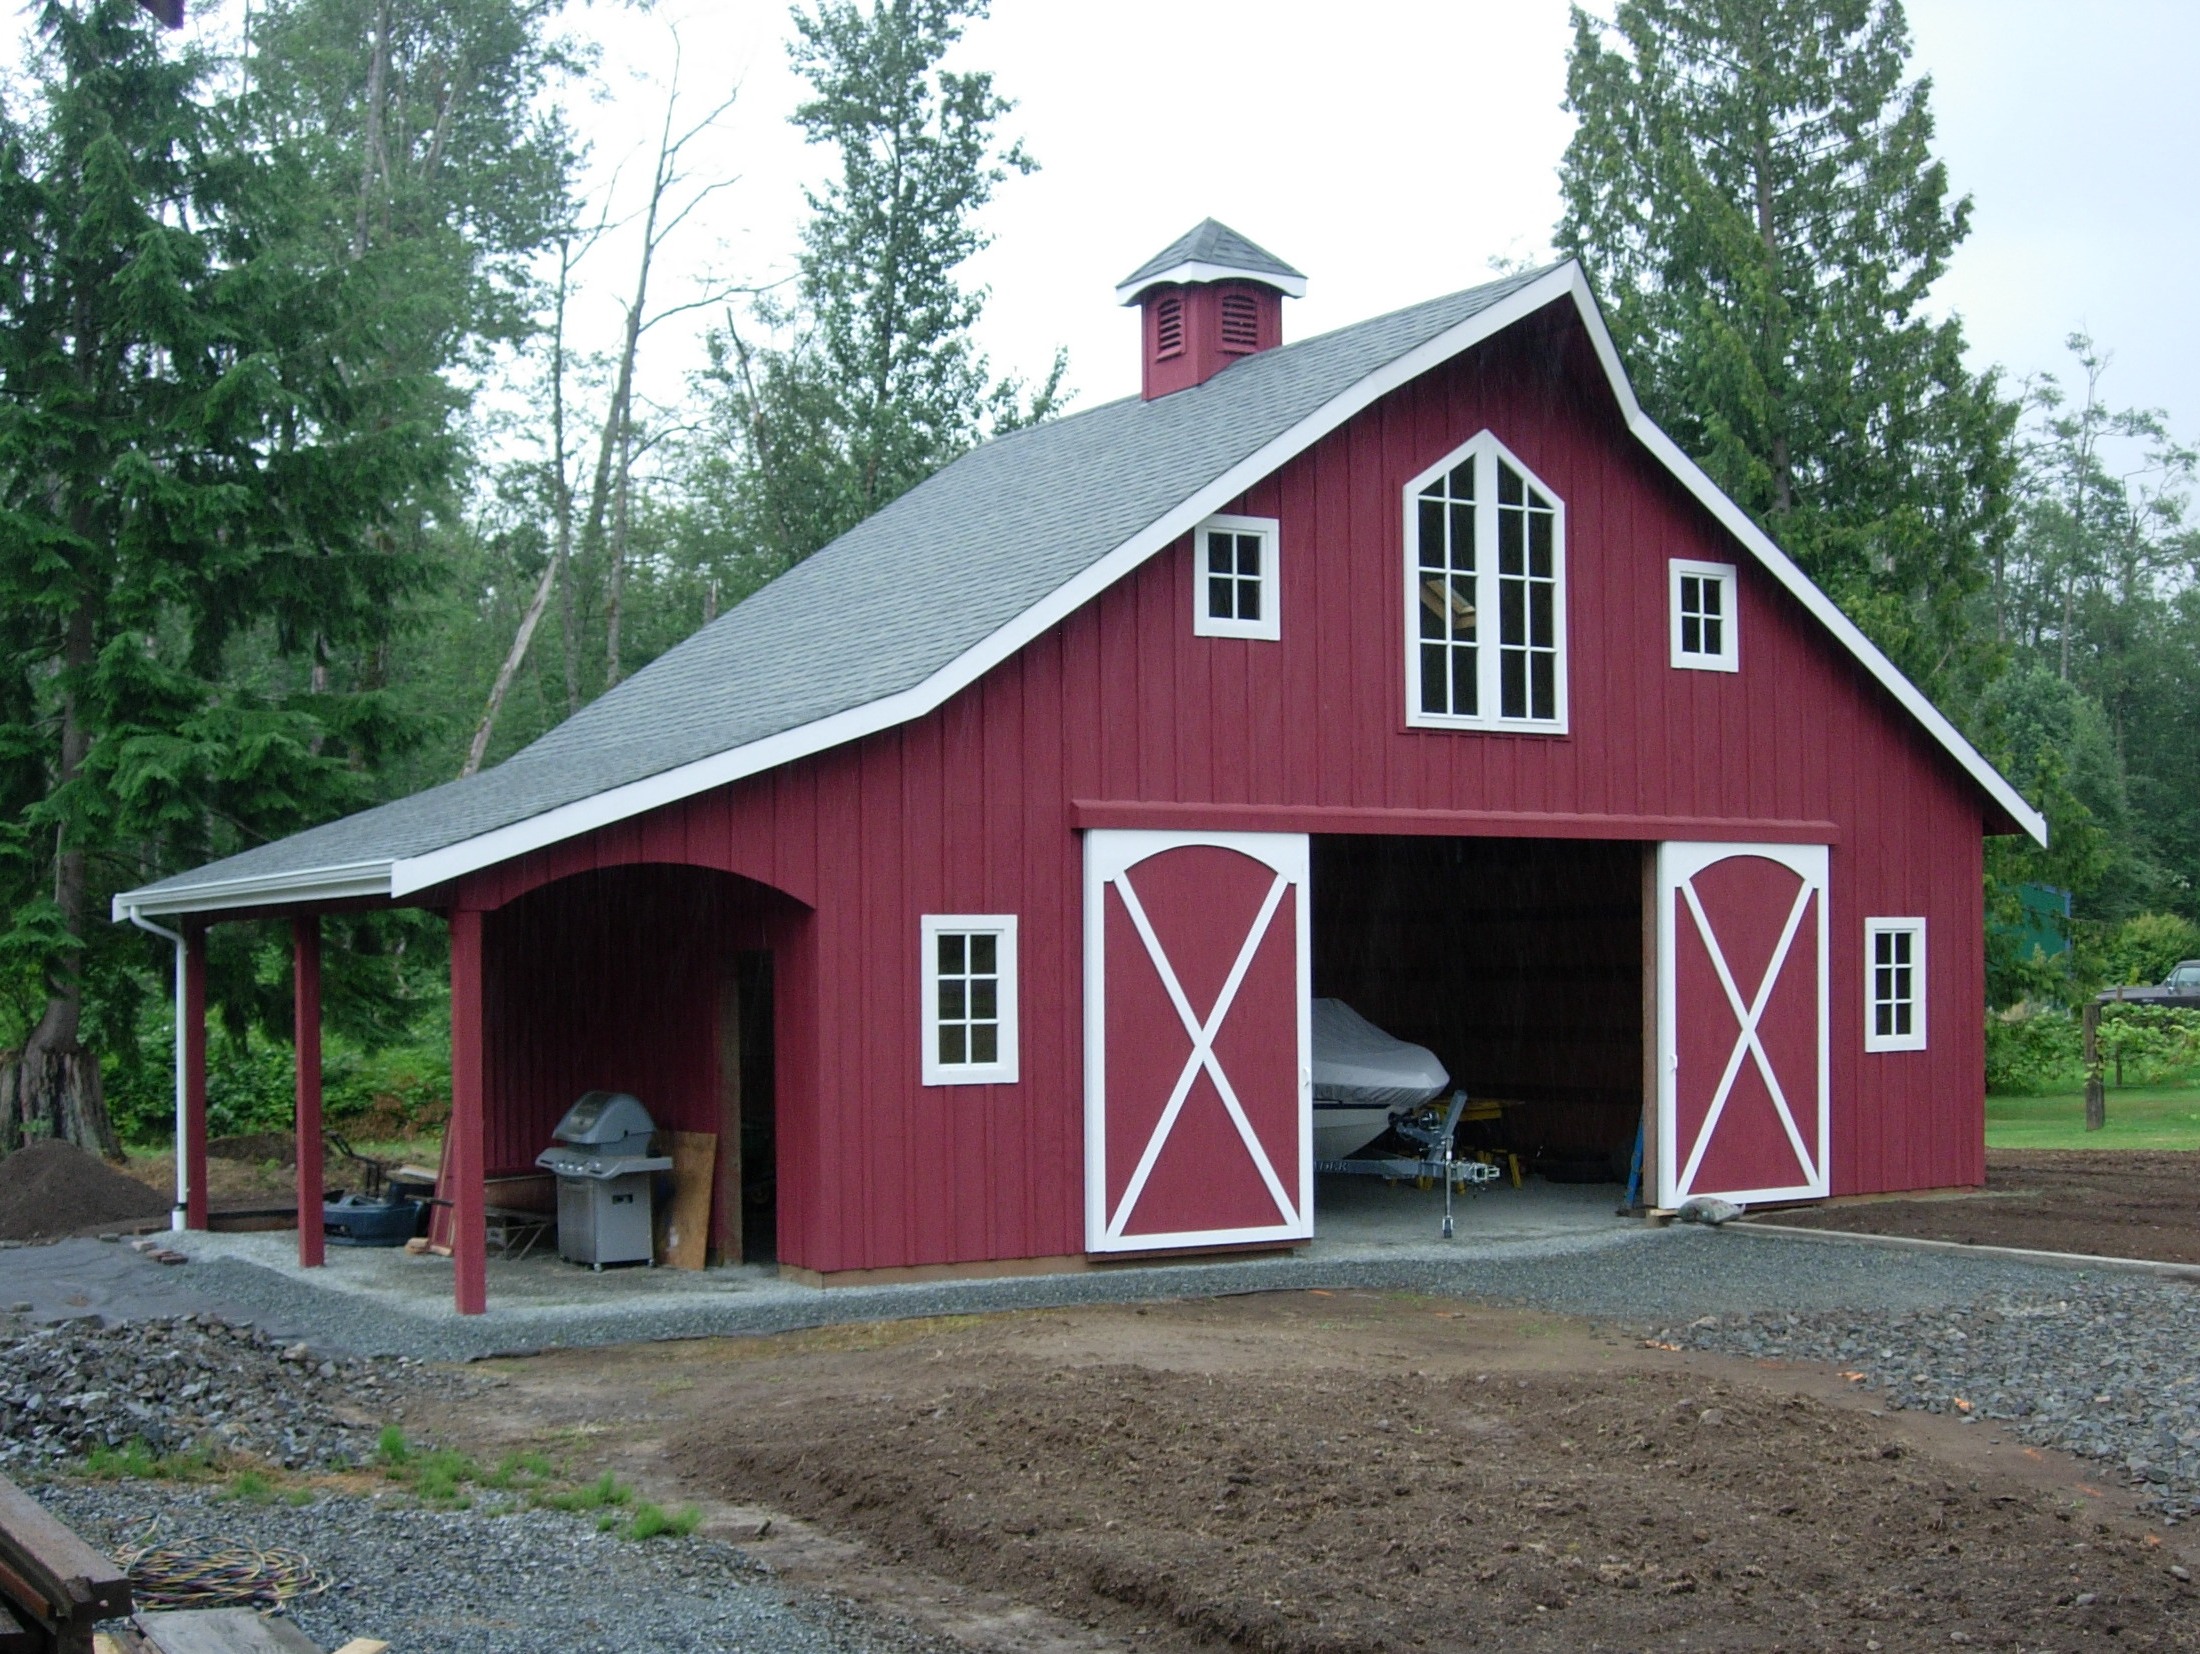 SMALL HORSE BARN FLOOR PLANS | Find house plans